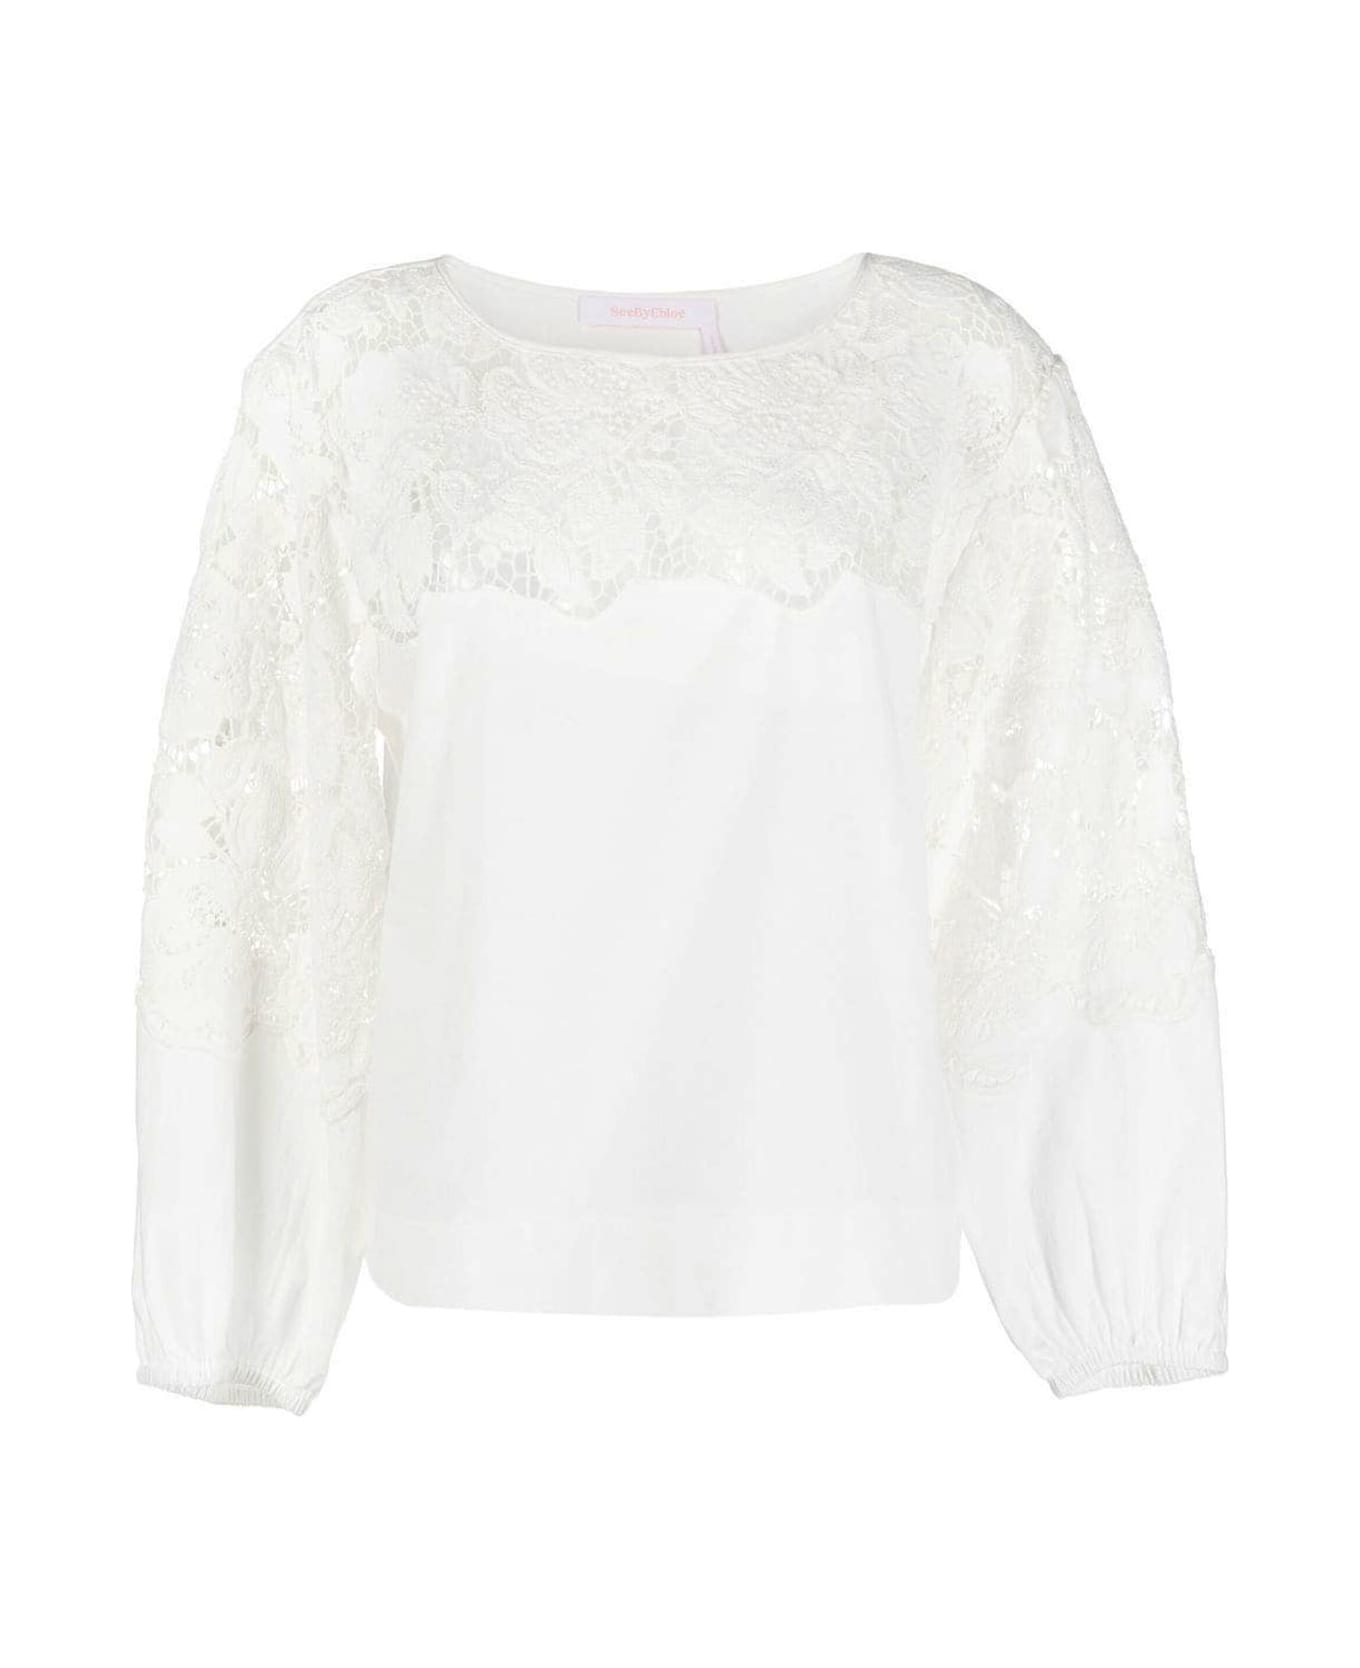 See by Chloé Top - CLOUDY WHITE ブラウス